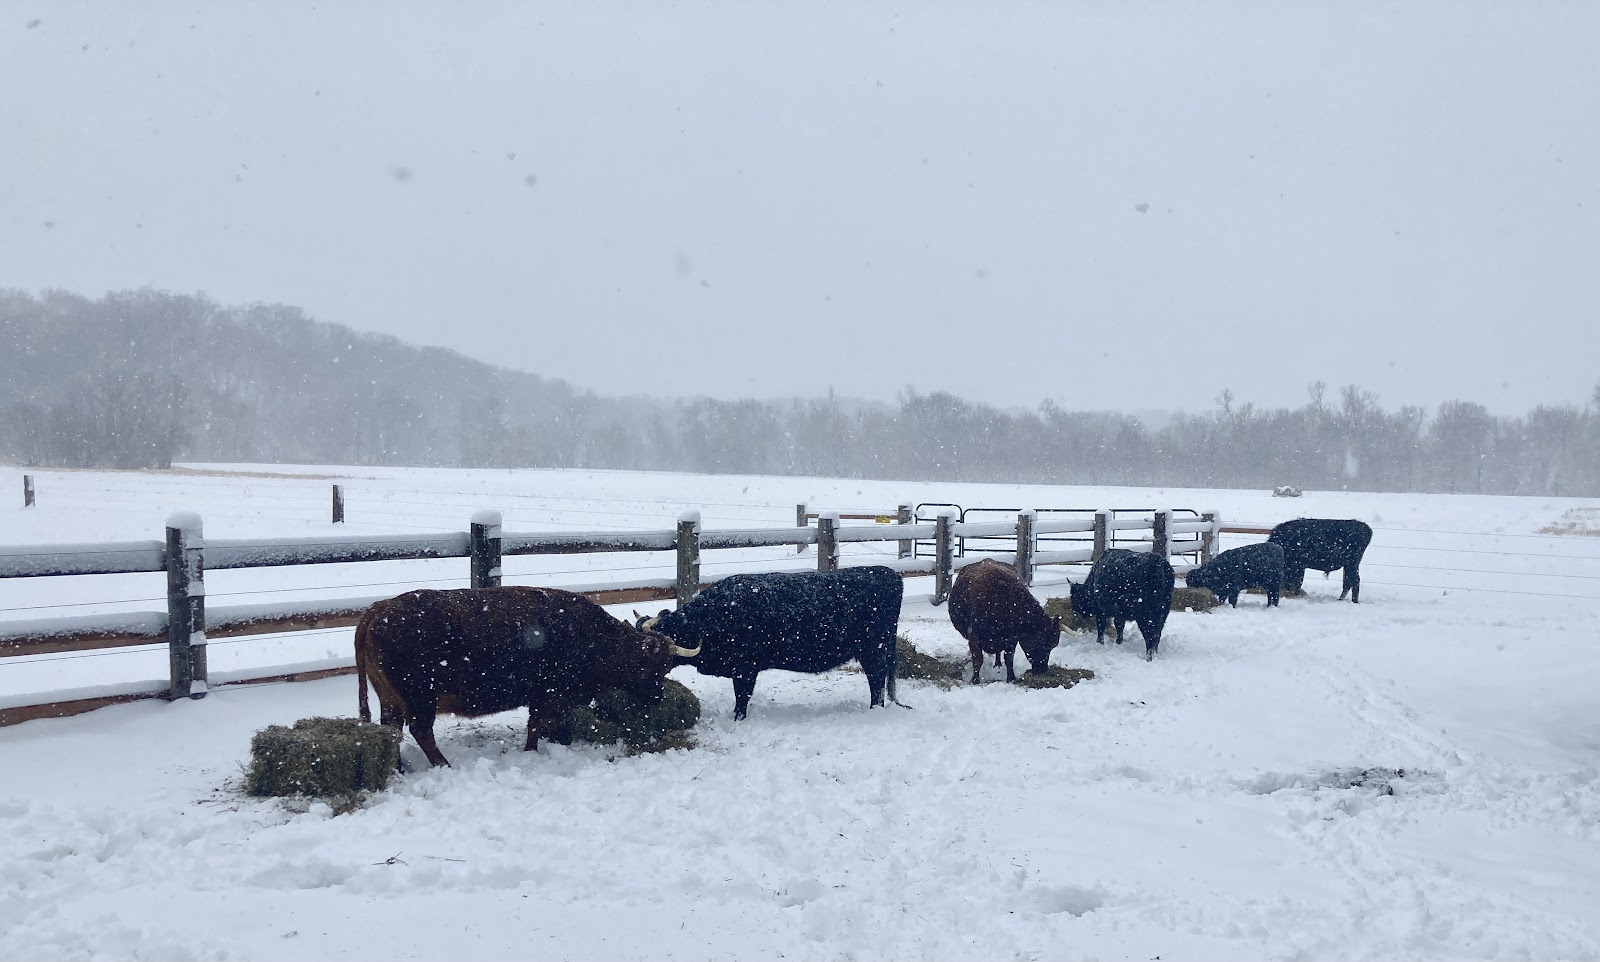 Cows eating hay in the middle of a blizzard.